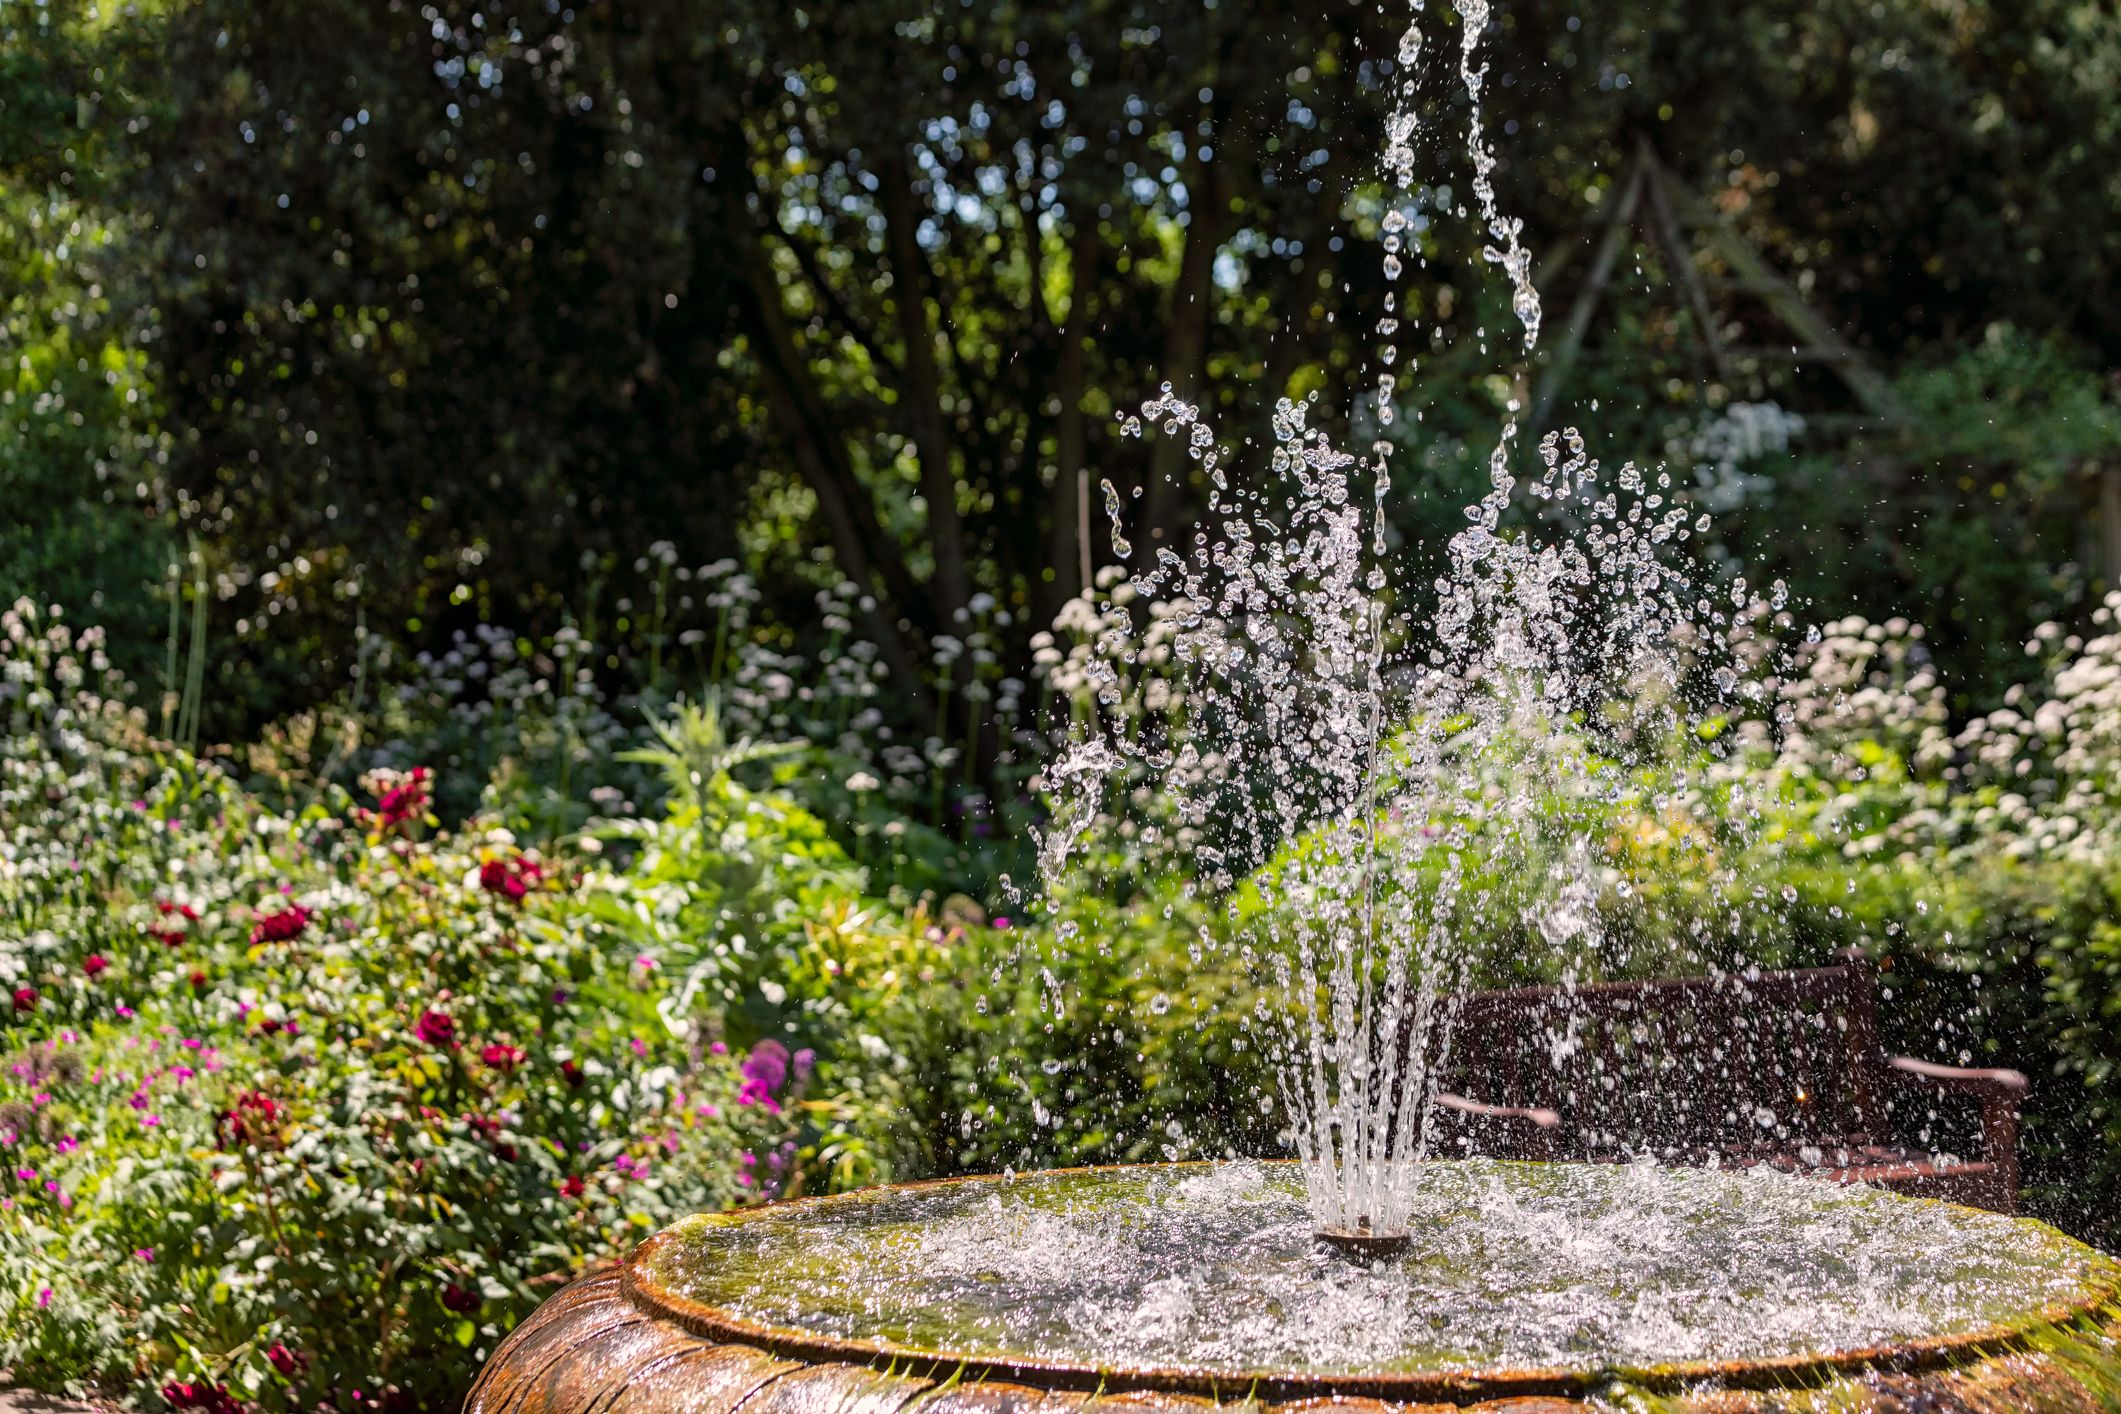 Affordable Garden Water Features, Outdoor Water Features With Lights Uk